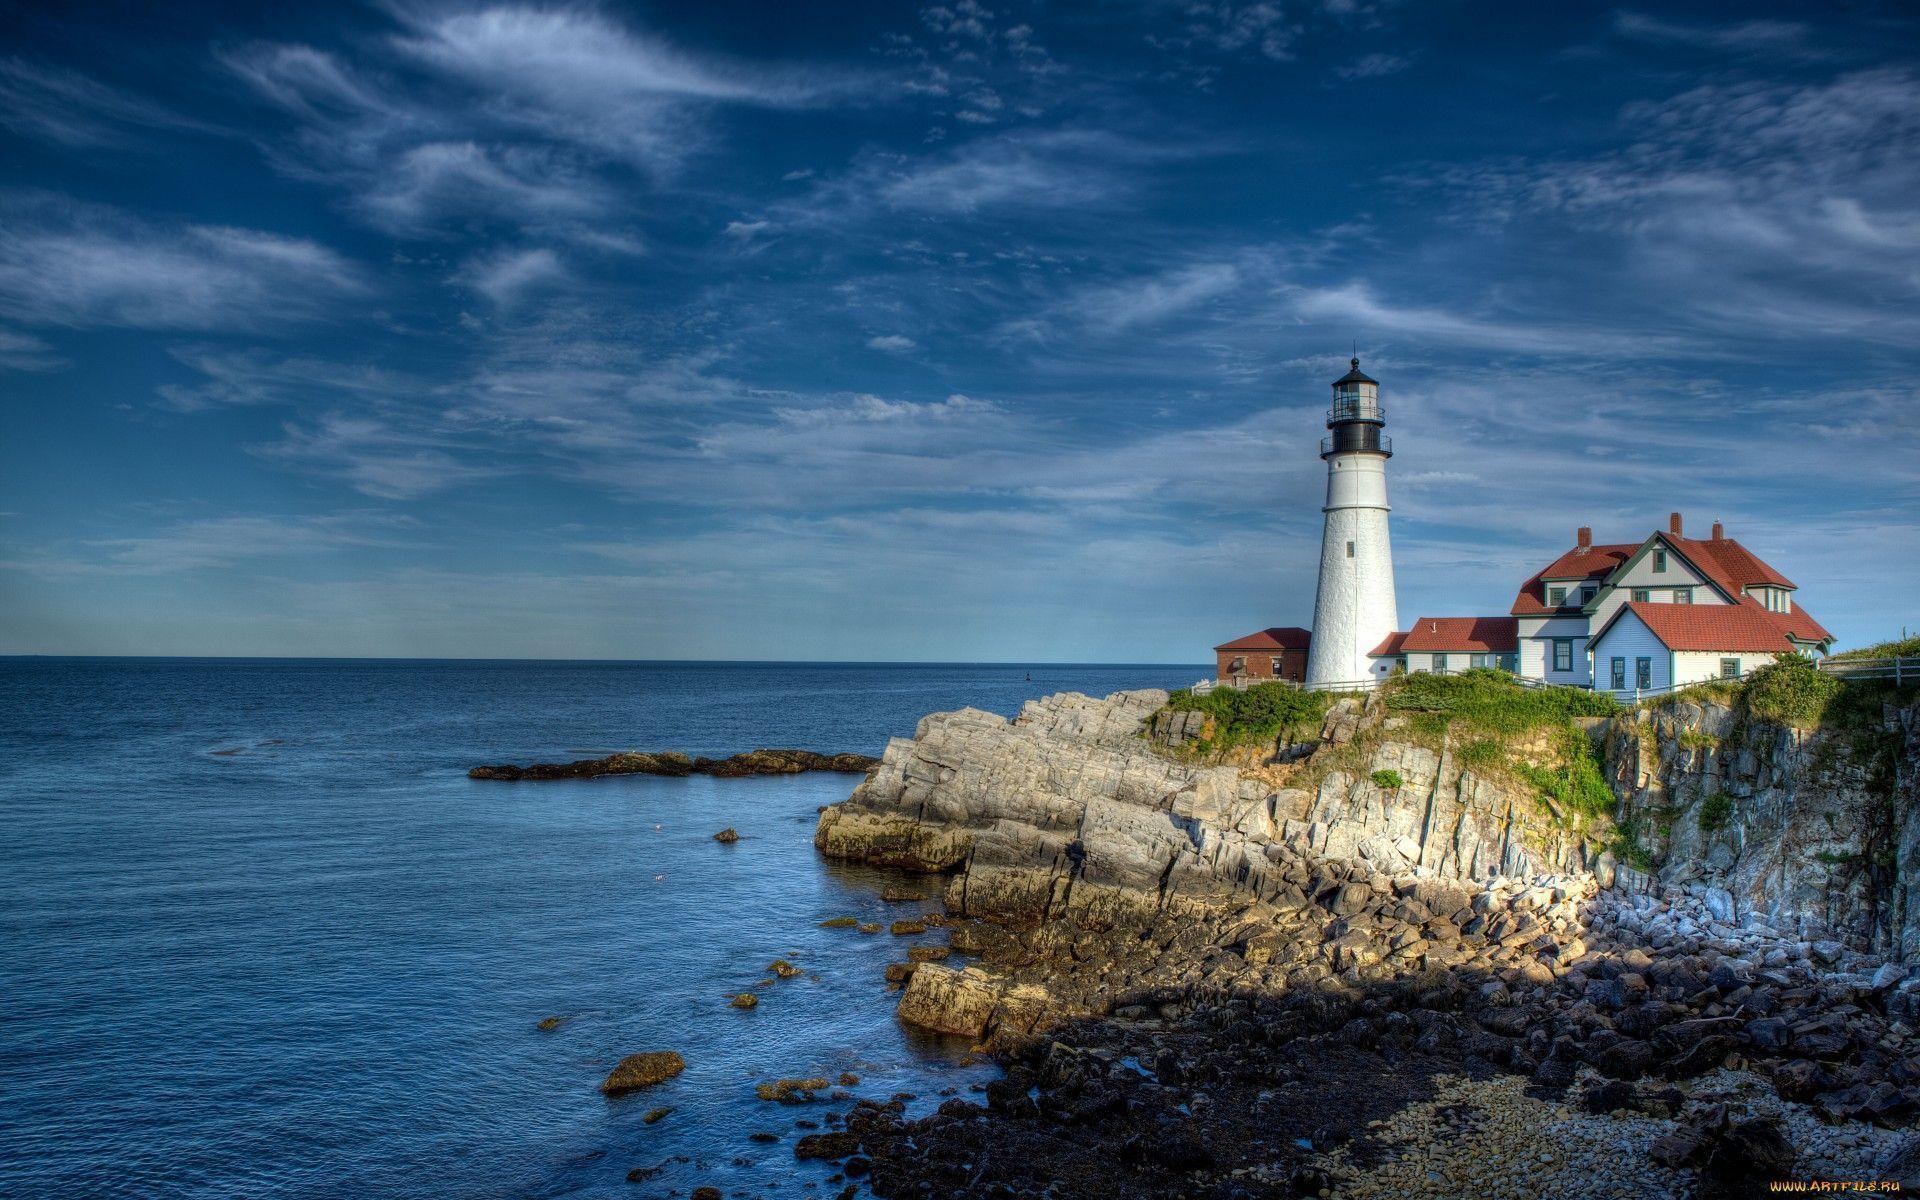 Lighthouse Desktop Wallpapers - Wallpaper Cave Full Hd Wallpapers For Windows 8 1920x1080